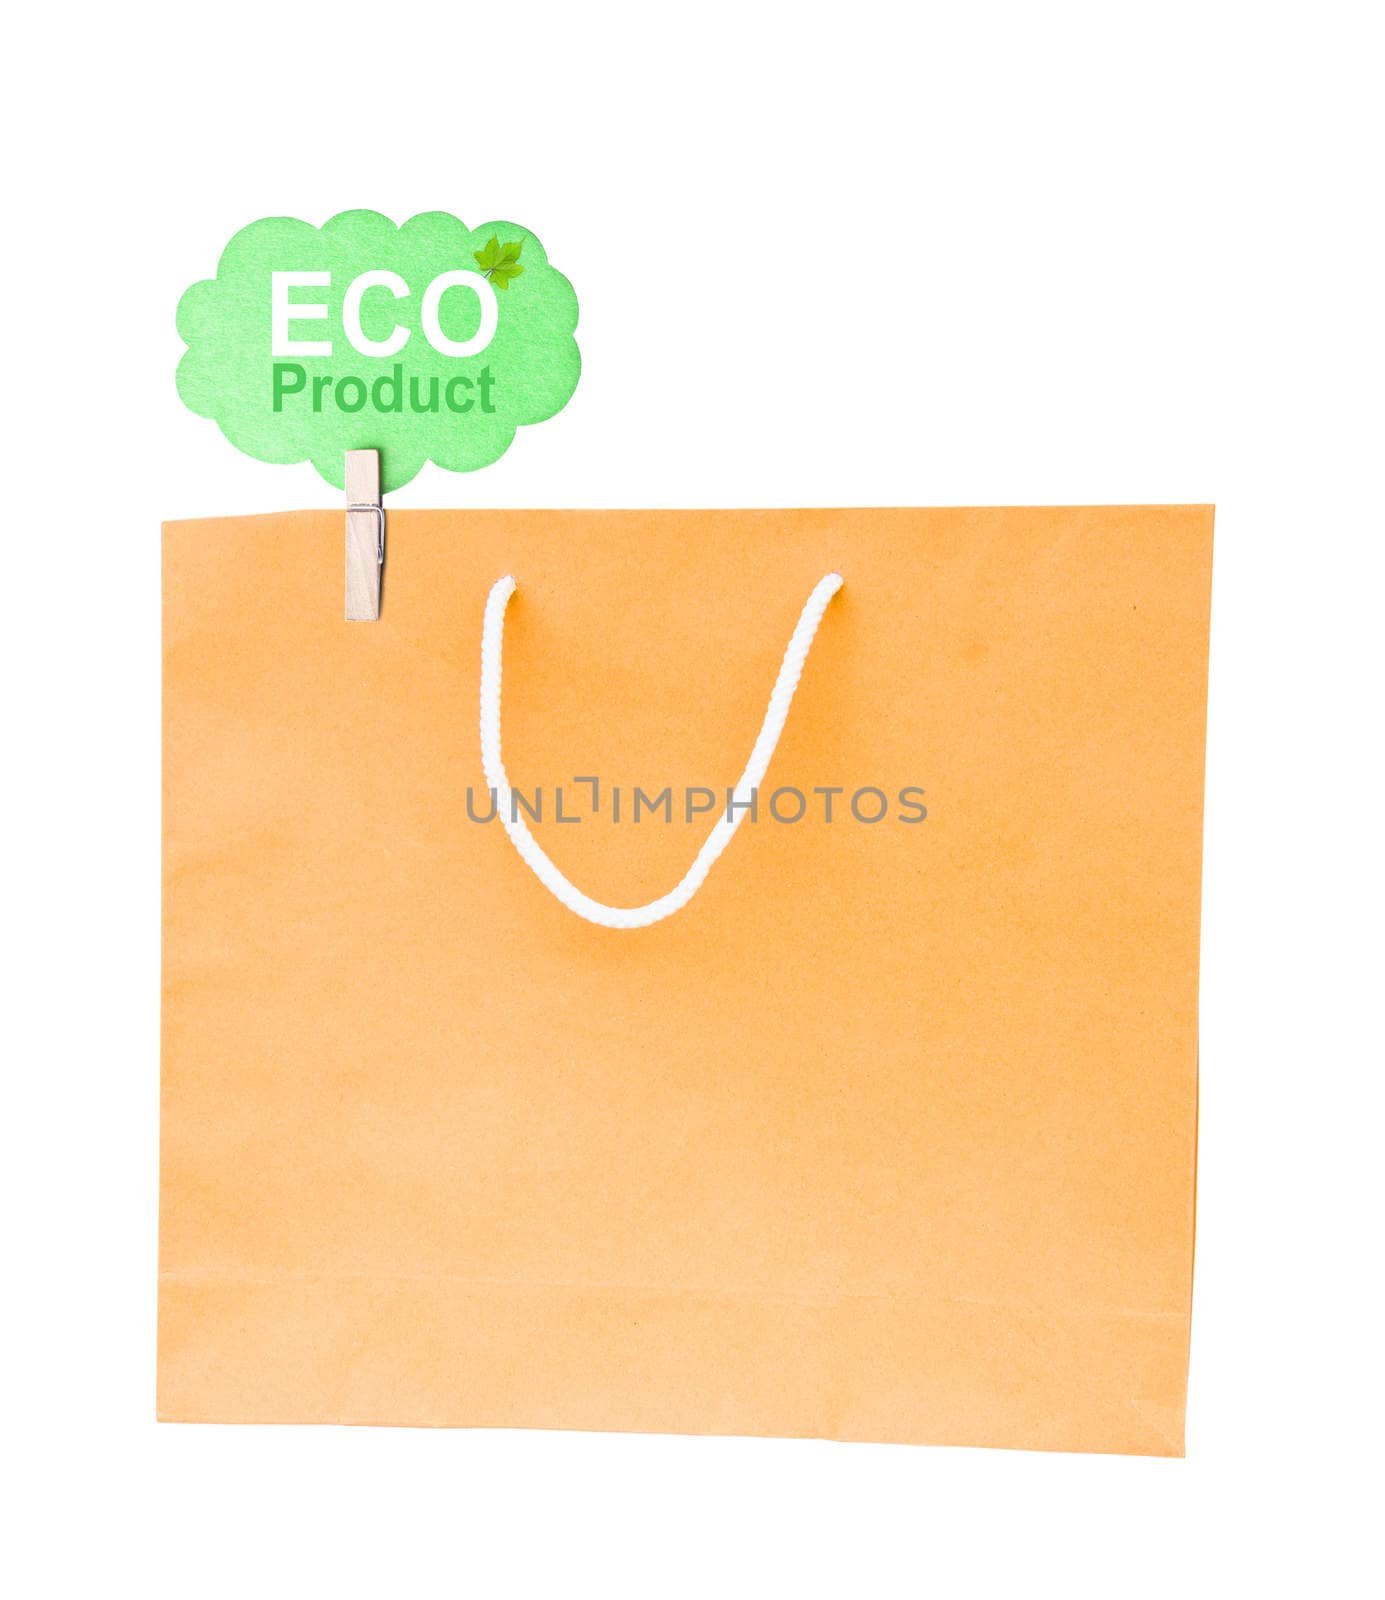 Blank brown paper bag isolated on white background. Eco product